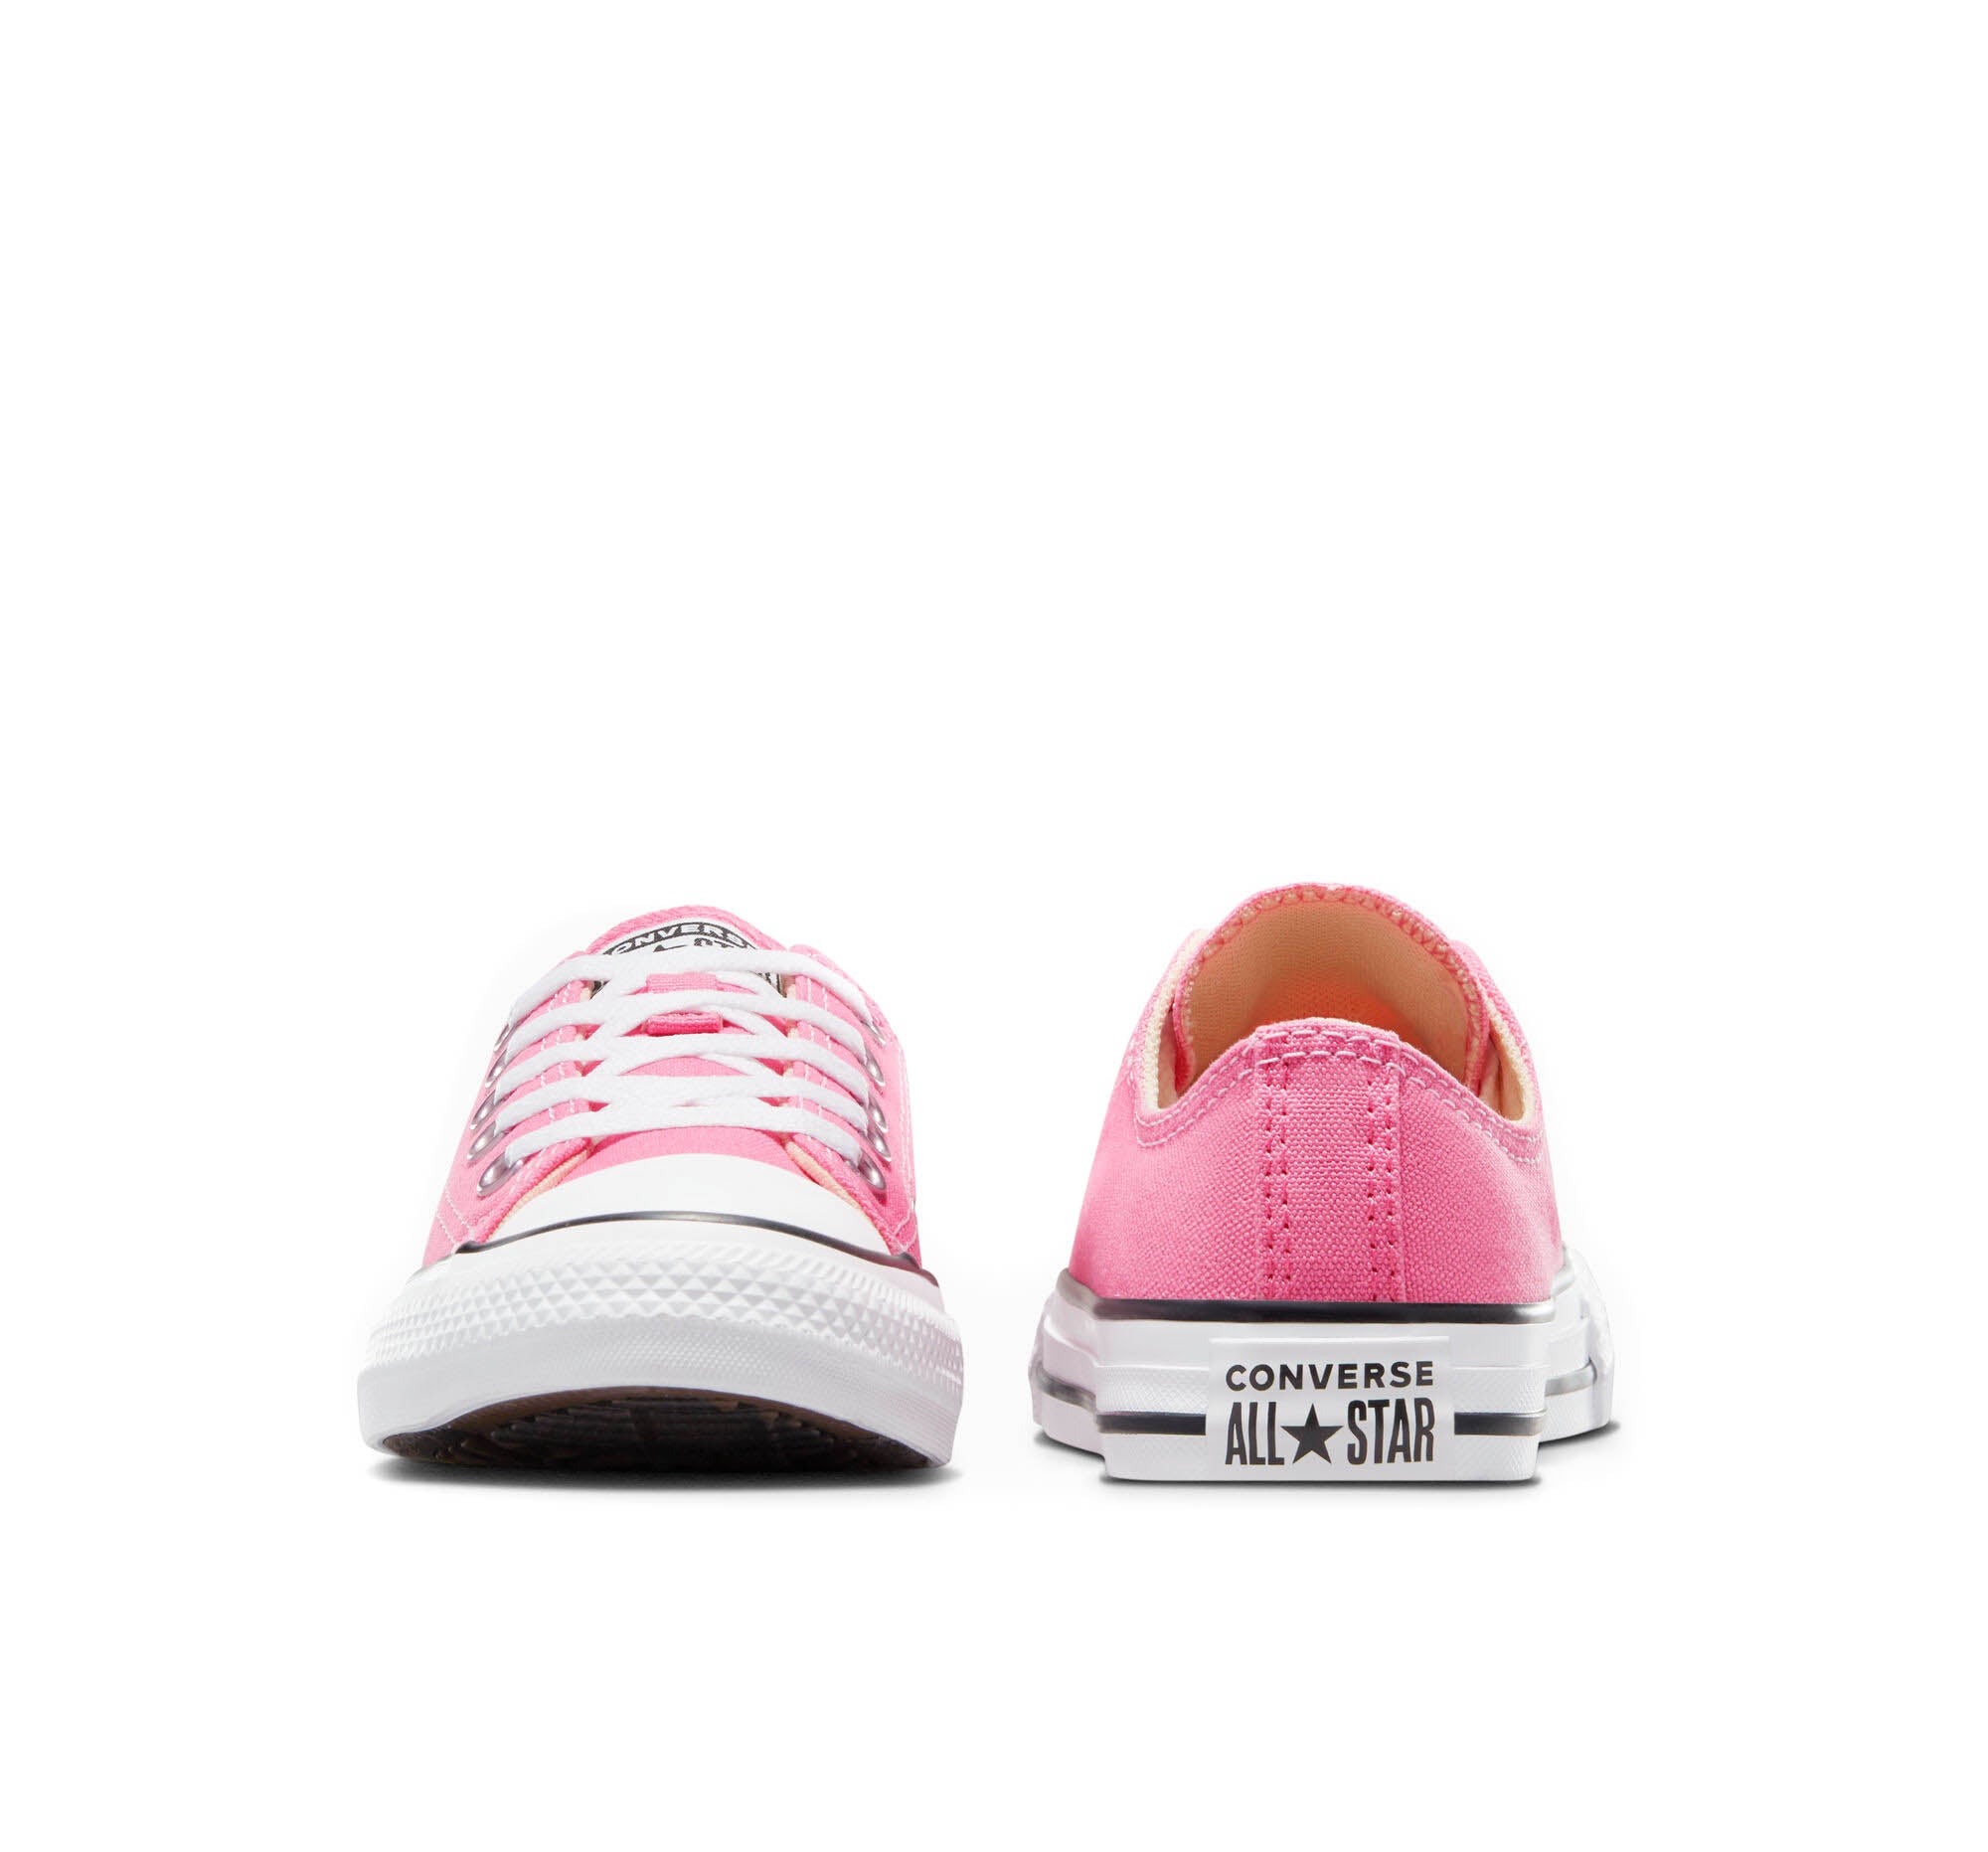 Youth Chuck Taylor All Star Low Ox - Pink